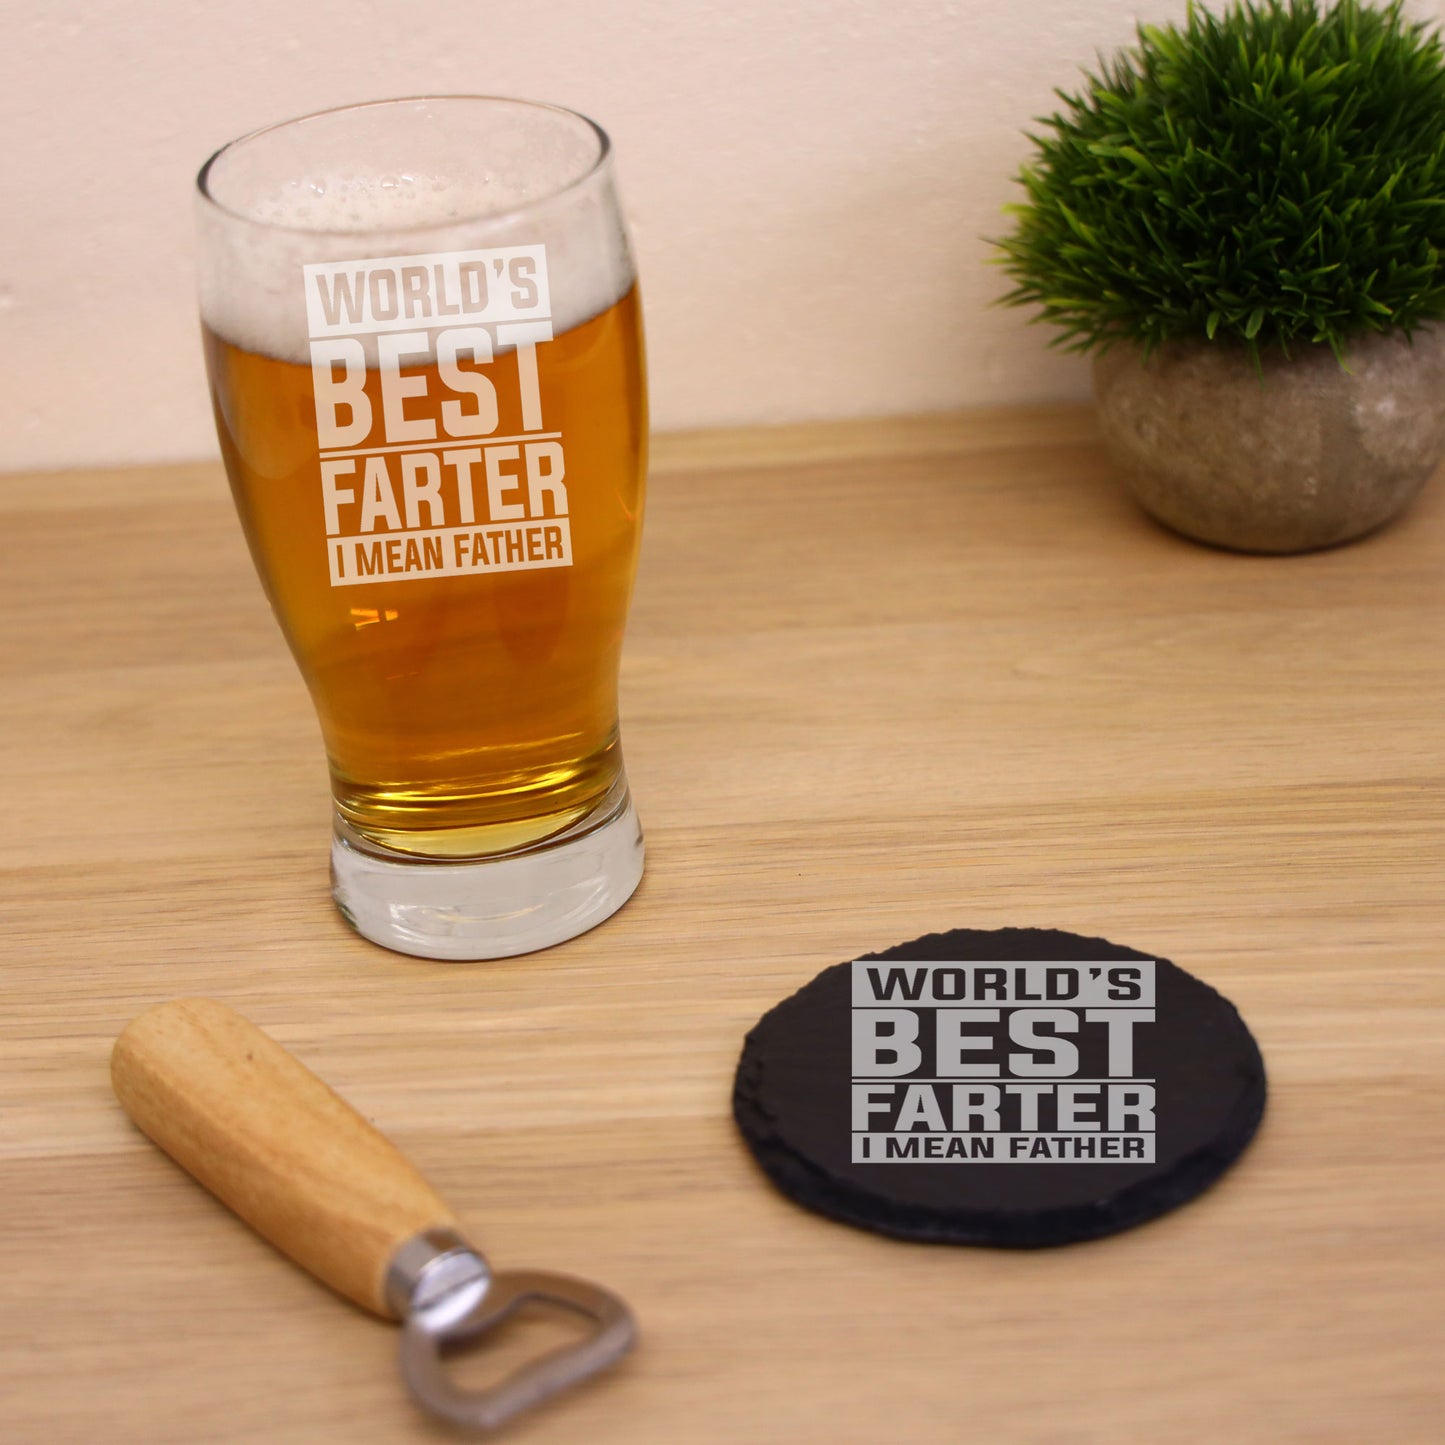 Worlds Best Farter I Mean Father Engraved Beer Glass and/or Coaster Set  - Always Looking Good - Block Style Glass & Round Coaster Set  